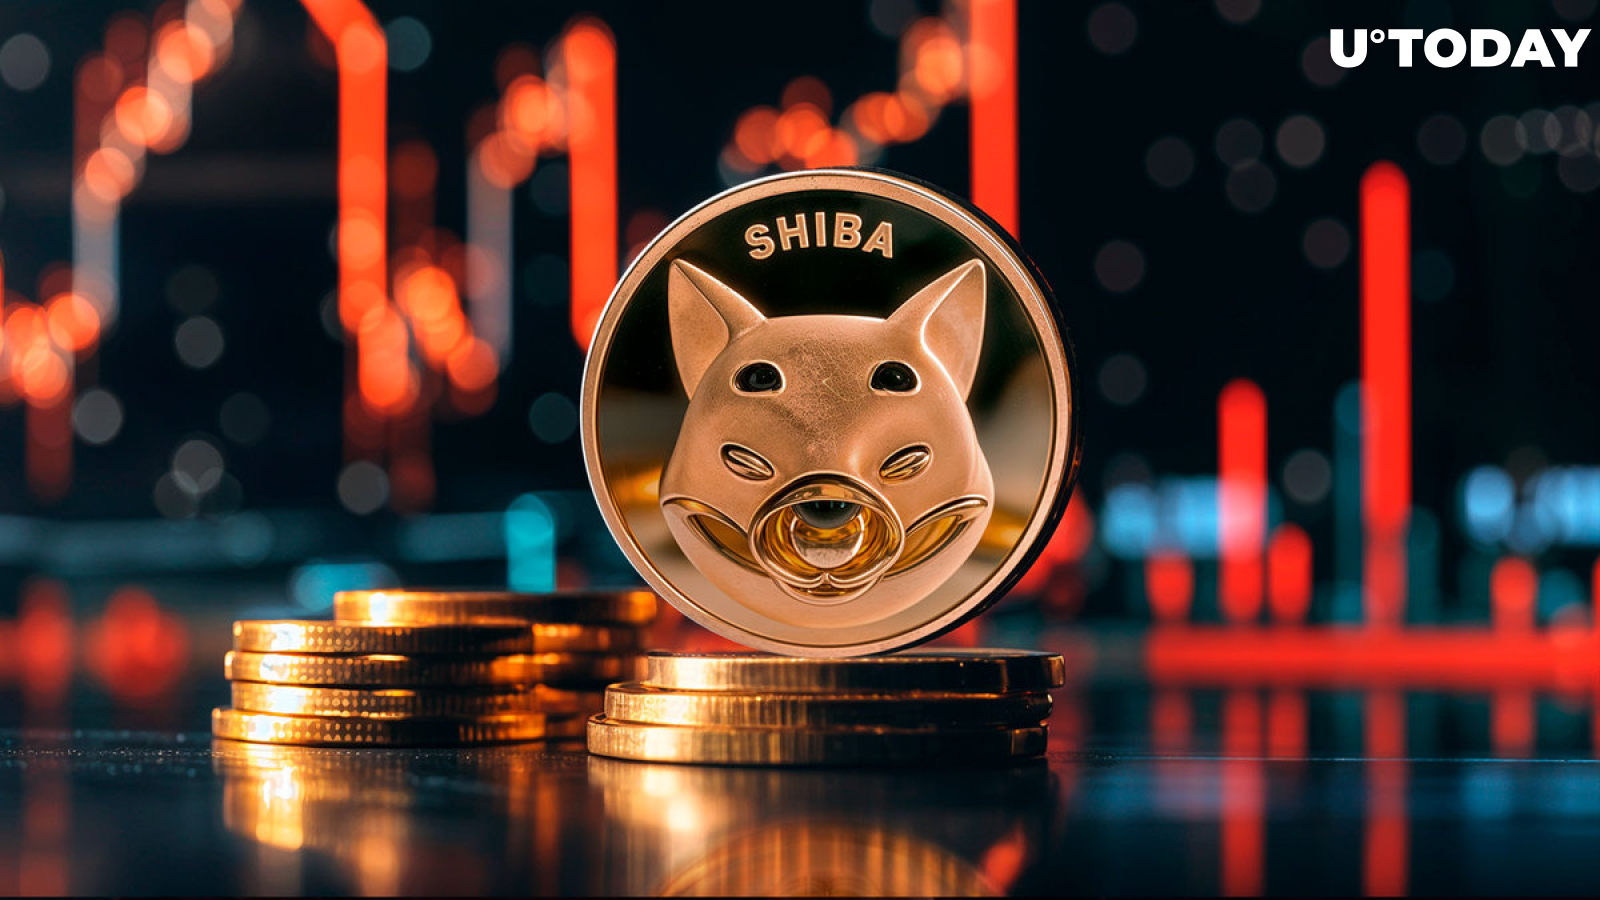 Shiba Inu (SHIB) Enters 'Red Zone' After Price Drops Below Crucial Support